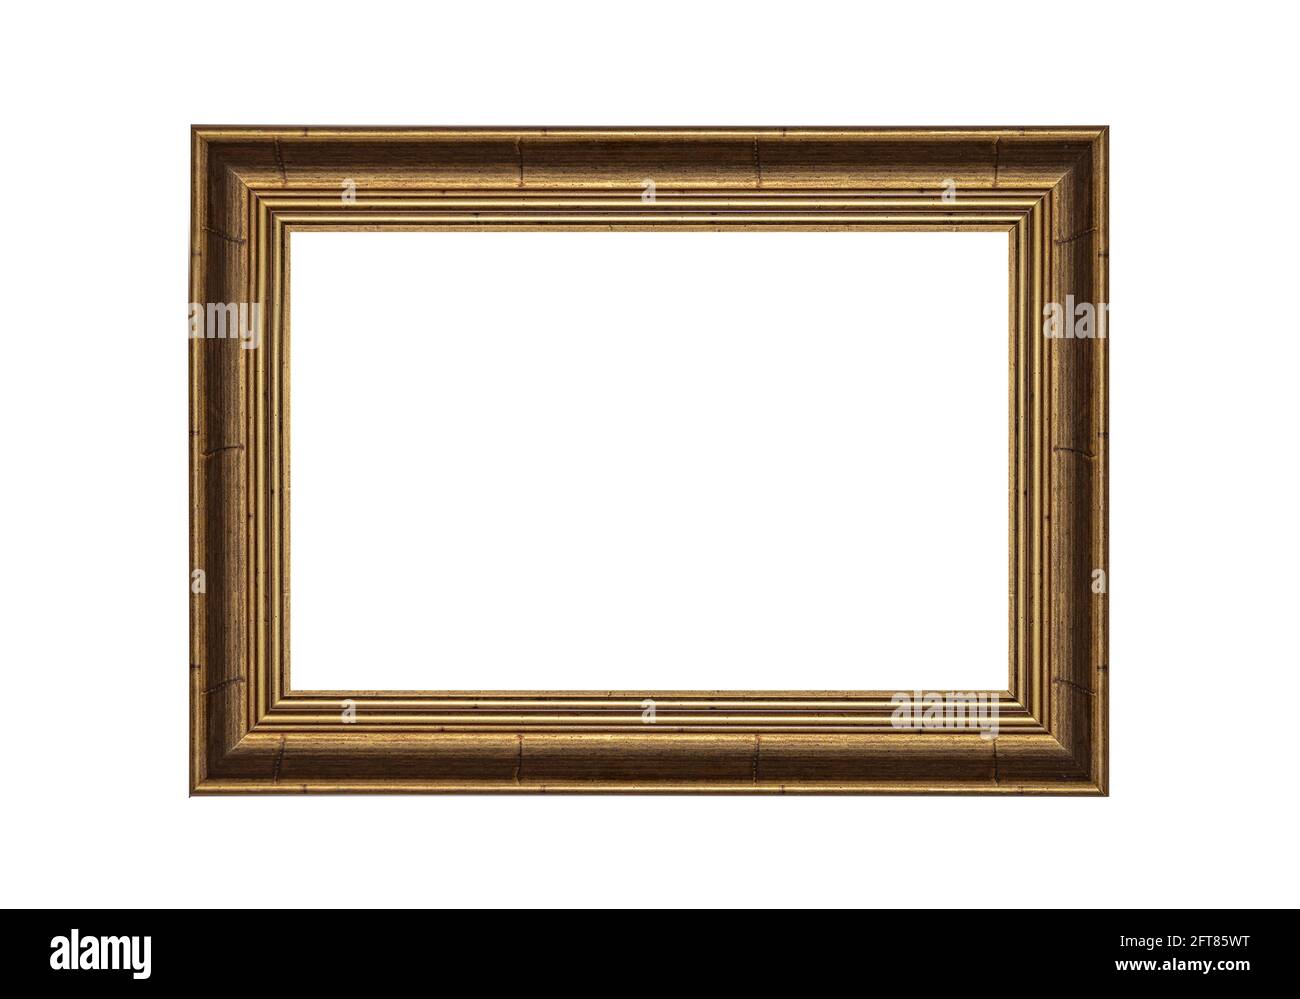 Wooden picture frame isolated on white. Stock Photo